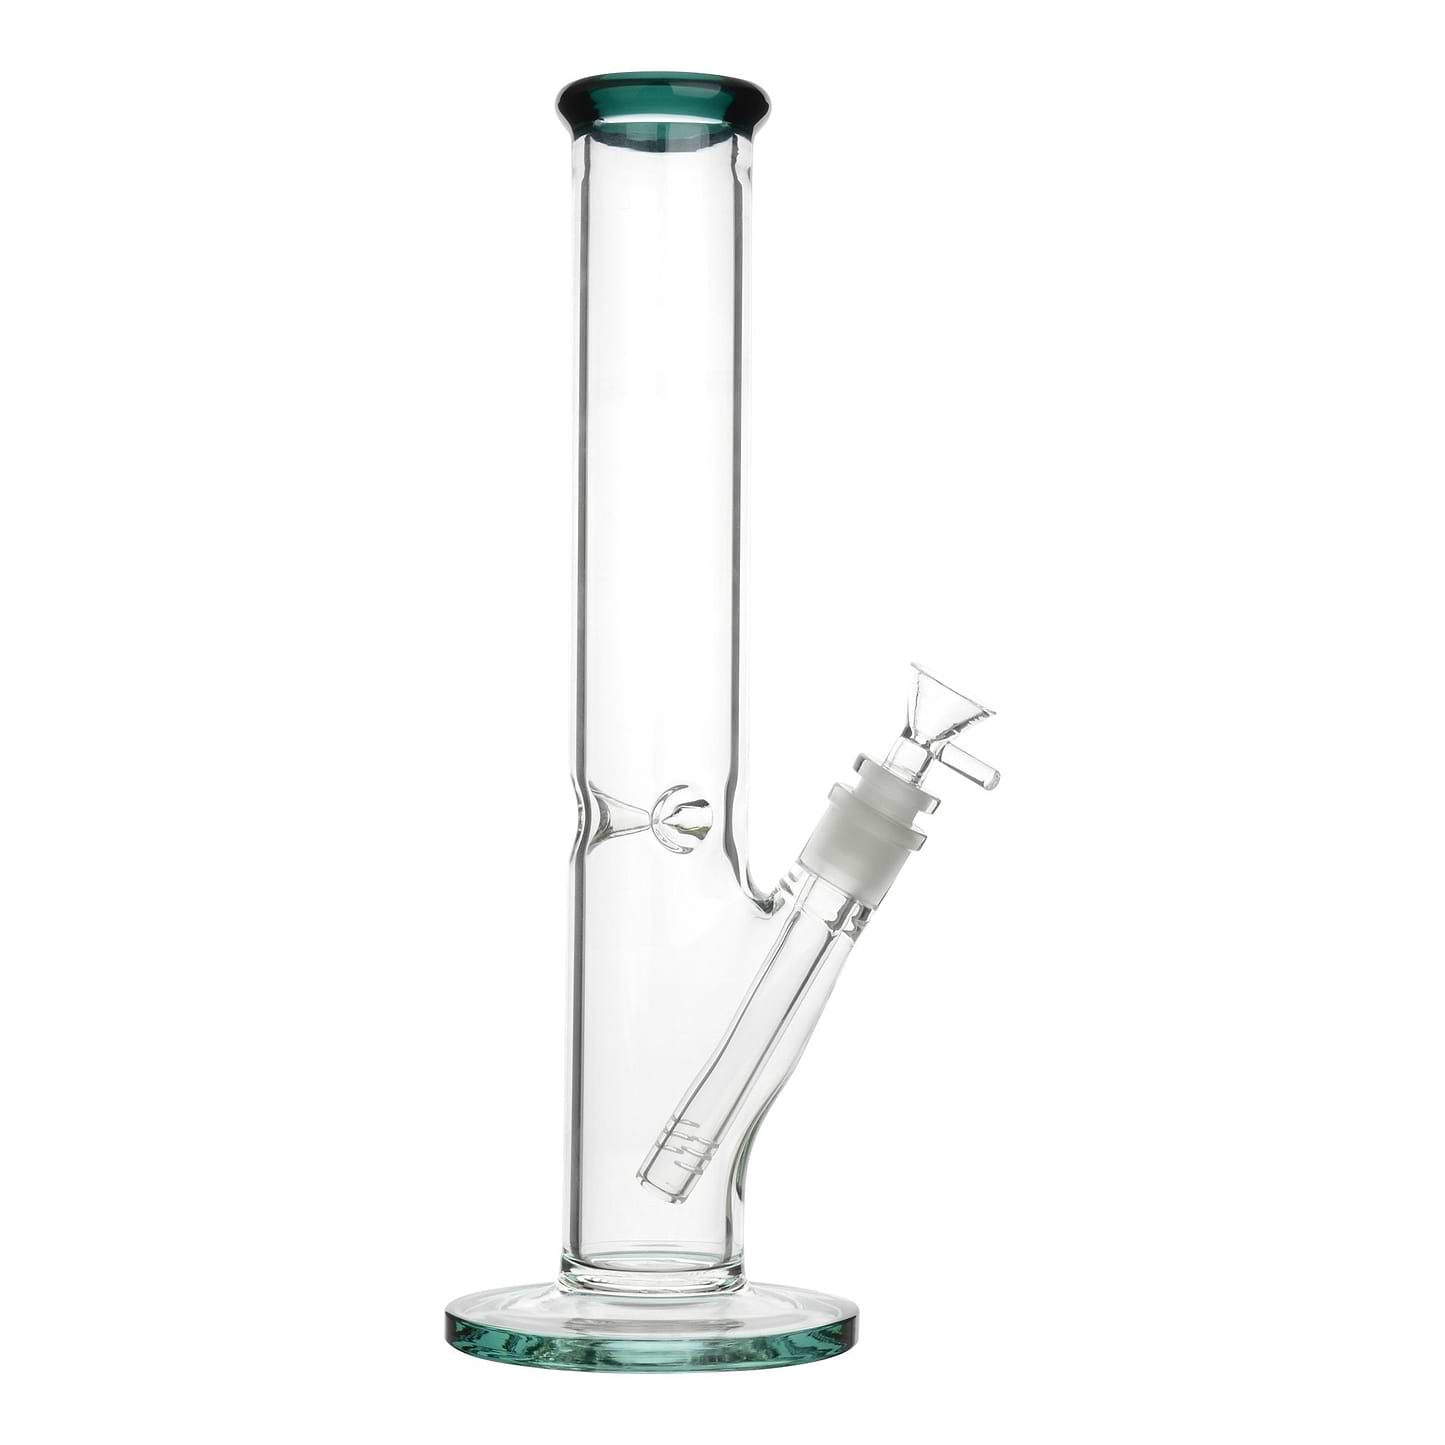 Full shot of 14 inch glass straight bong with teal mouthpiece and base bowl on right